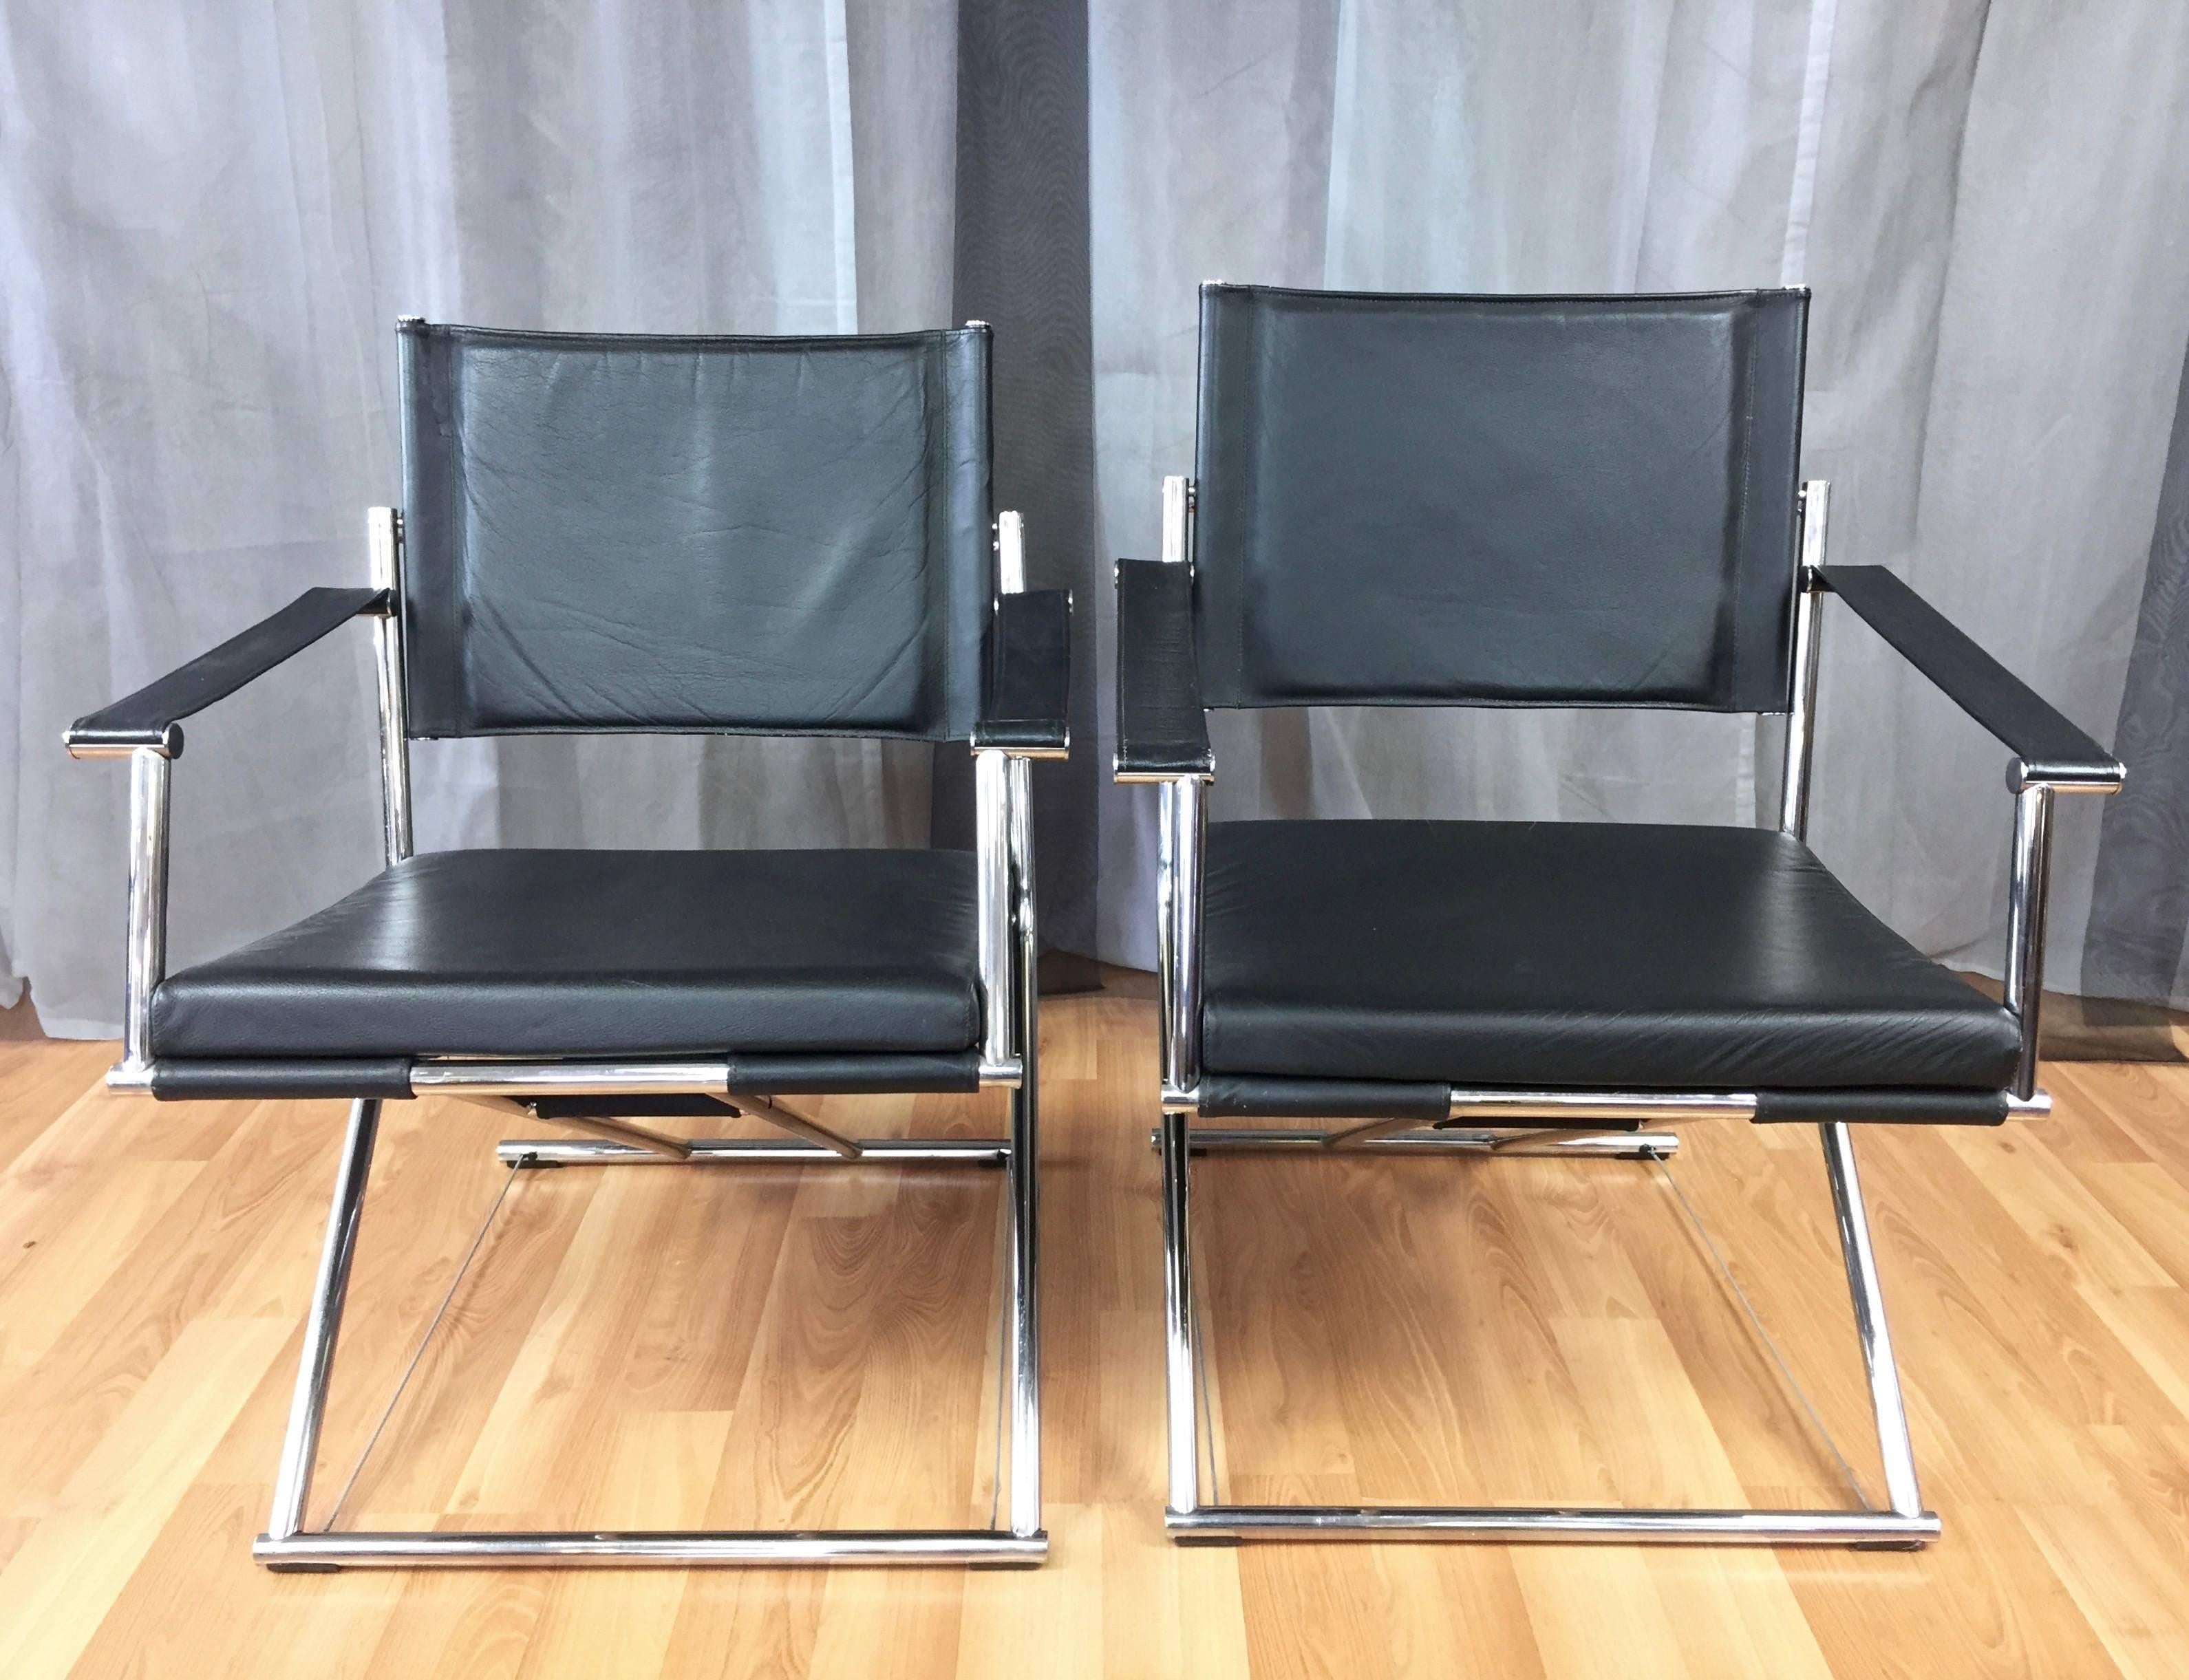 An ingeniously designed pair of modern leather and chrome Eureka folding campaign chairs or gliders by Mark Singer.

The uncommon chair consists of a two-piece tubular chrome frame, soft black leather seats, and flexible steel support cables.